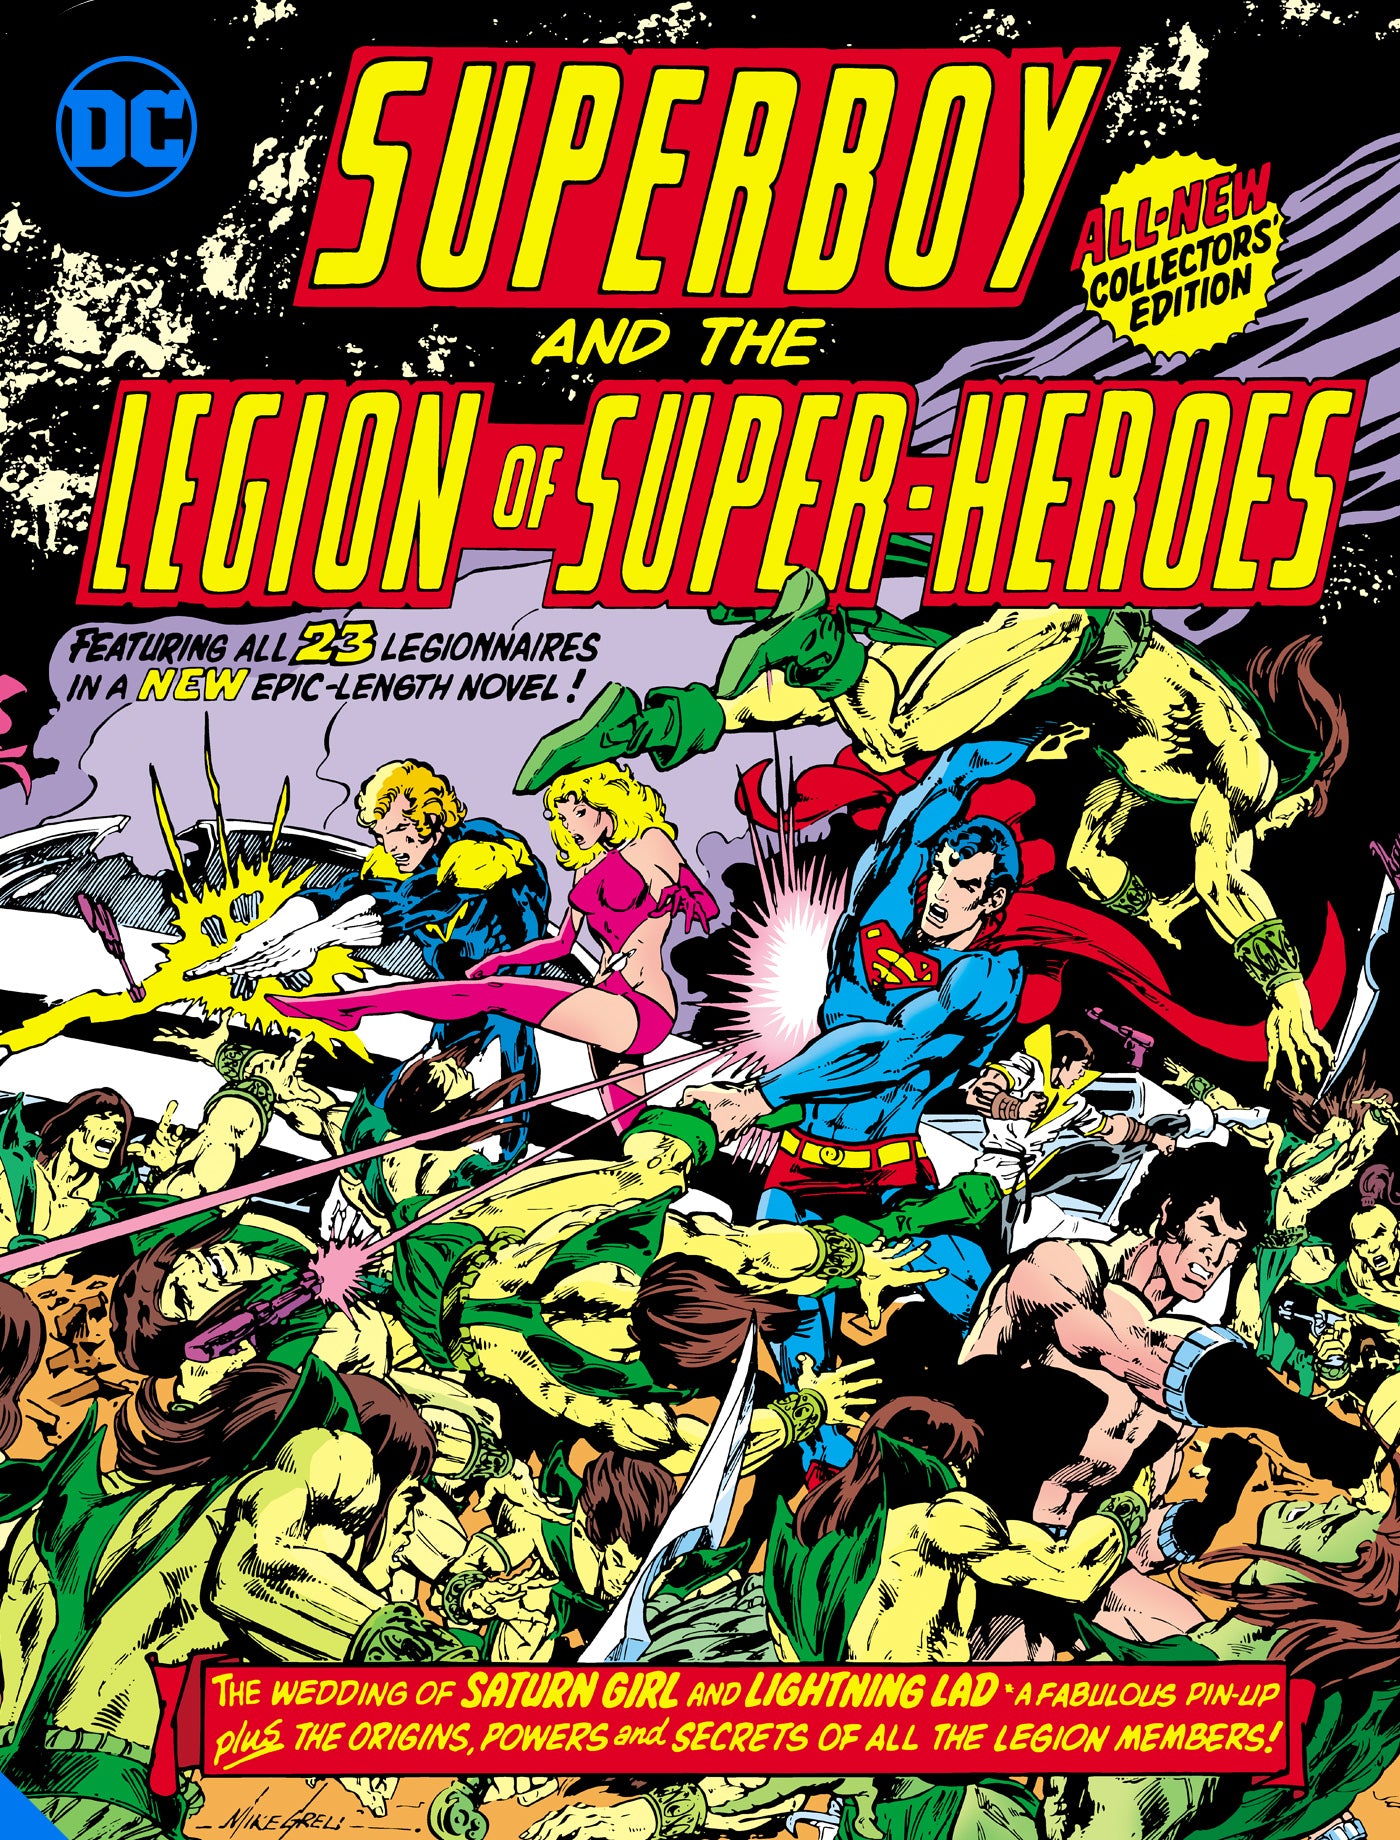 SUPERBOY AND THE LEGION OF SUPER-HEROES TABLOID EDITION HARDCOVER